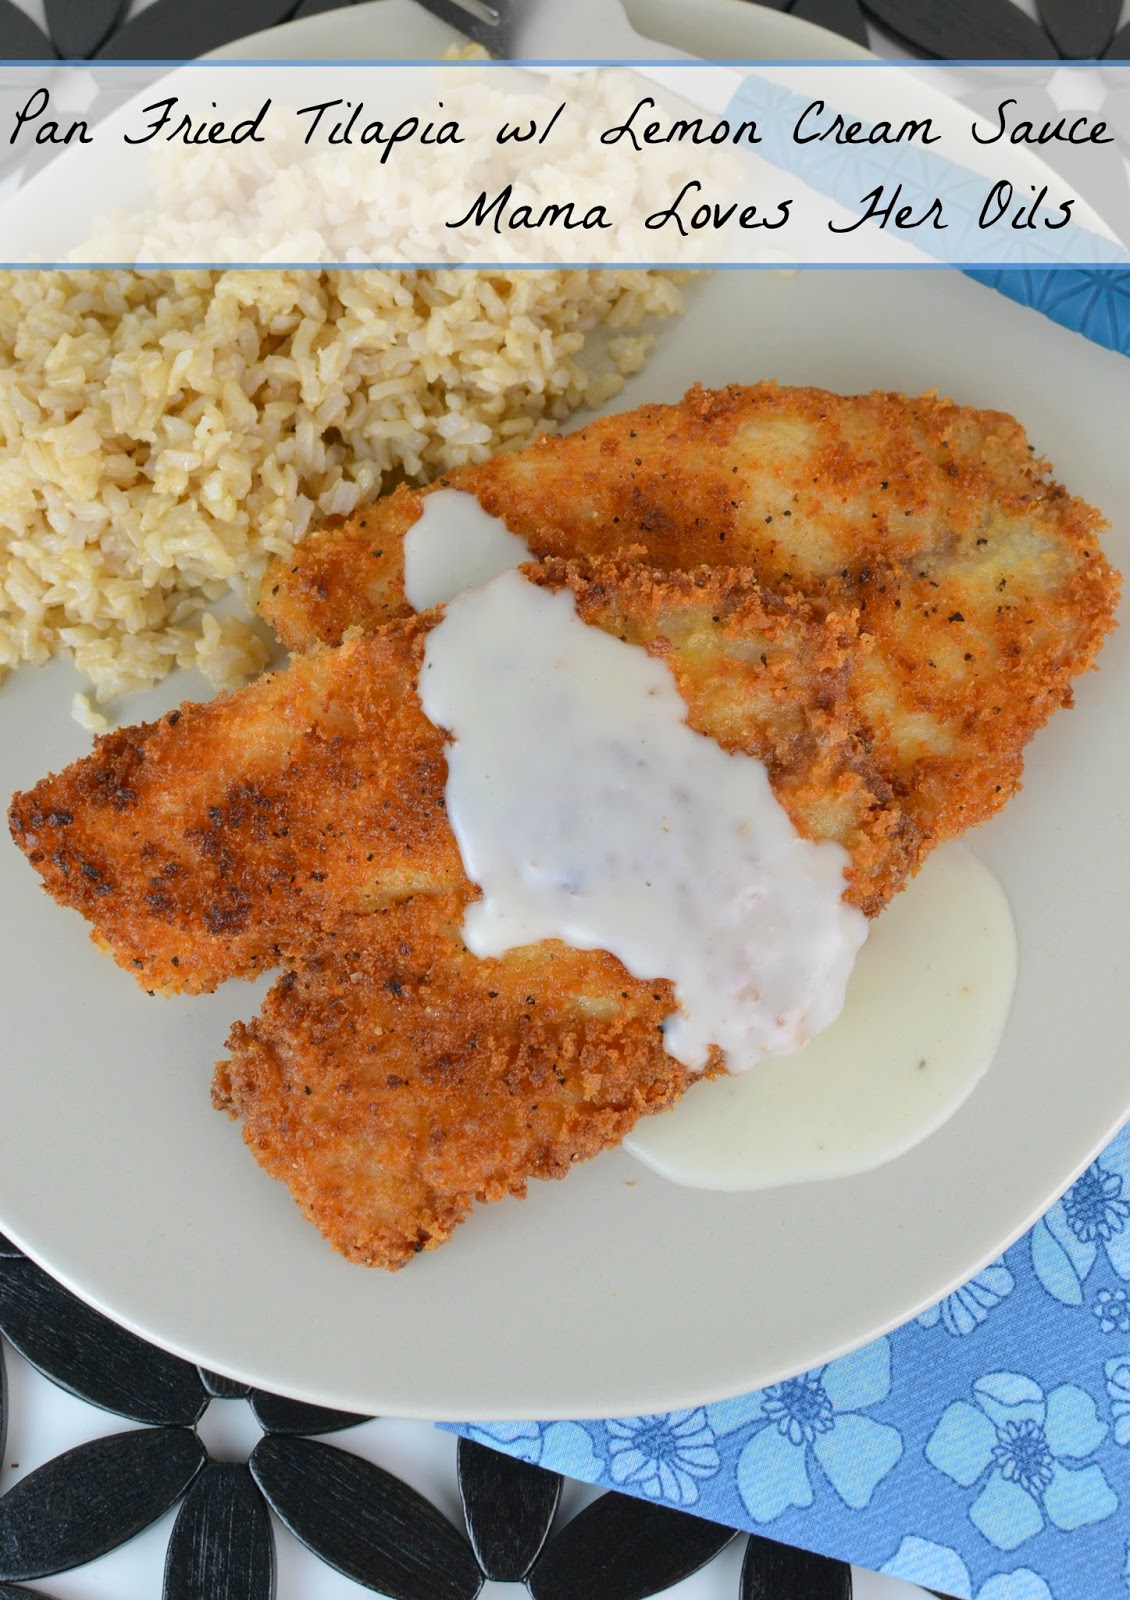 Perfectly fried tilapia with an amazing Young Living Lemon Essential Oil sauce! Great for weeknight dinners! Pan Fried Tilapia with Young Living Essential Oil Lemon Cream Sauce from Mama Loves Her Oils!